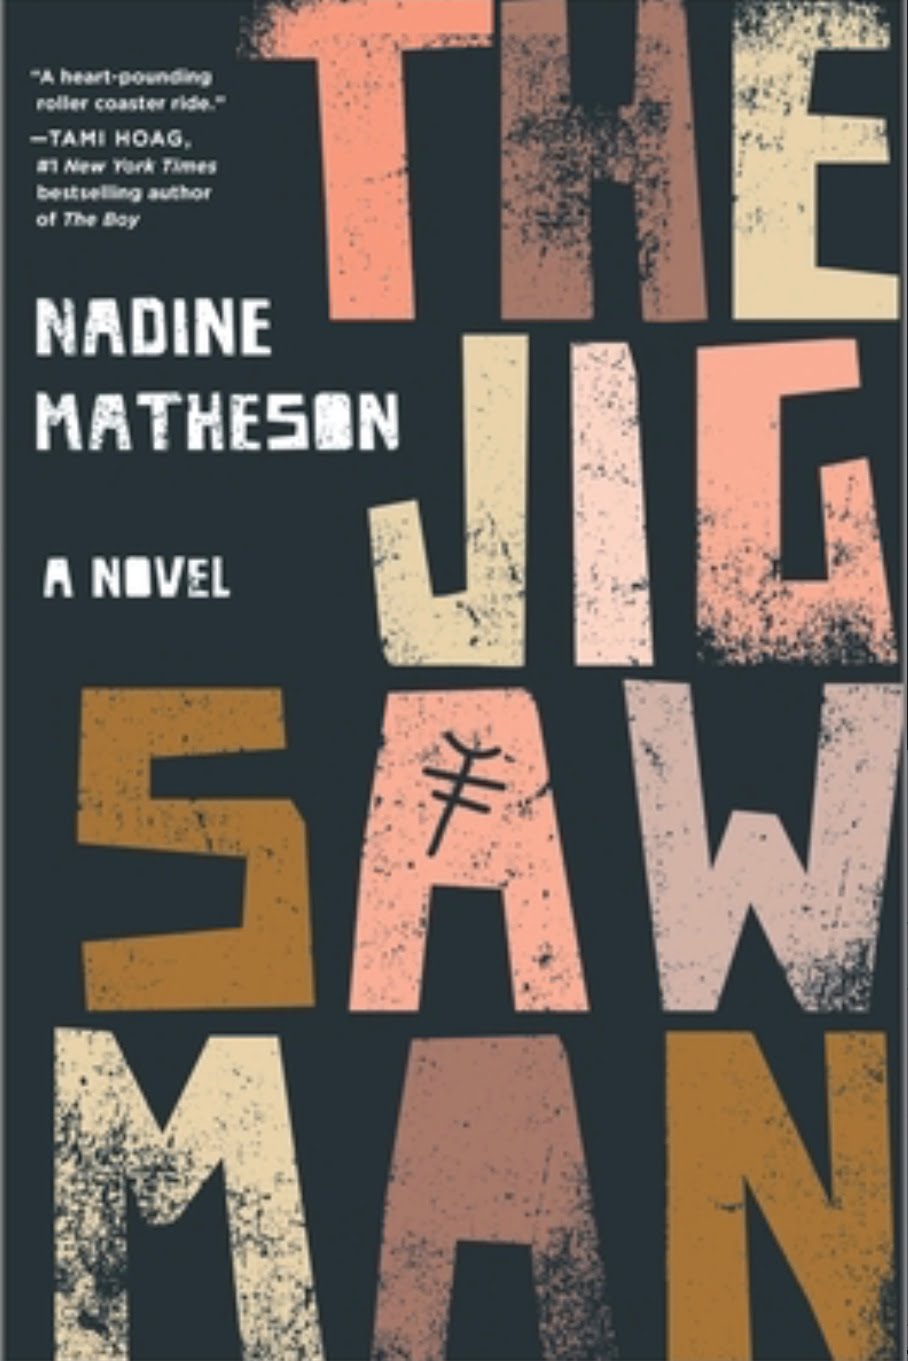 THE JIGSAW MAN BY NADINE MATHESON – BOOK REVIEW